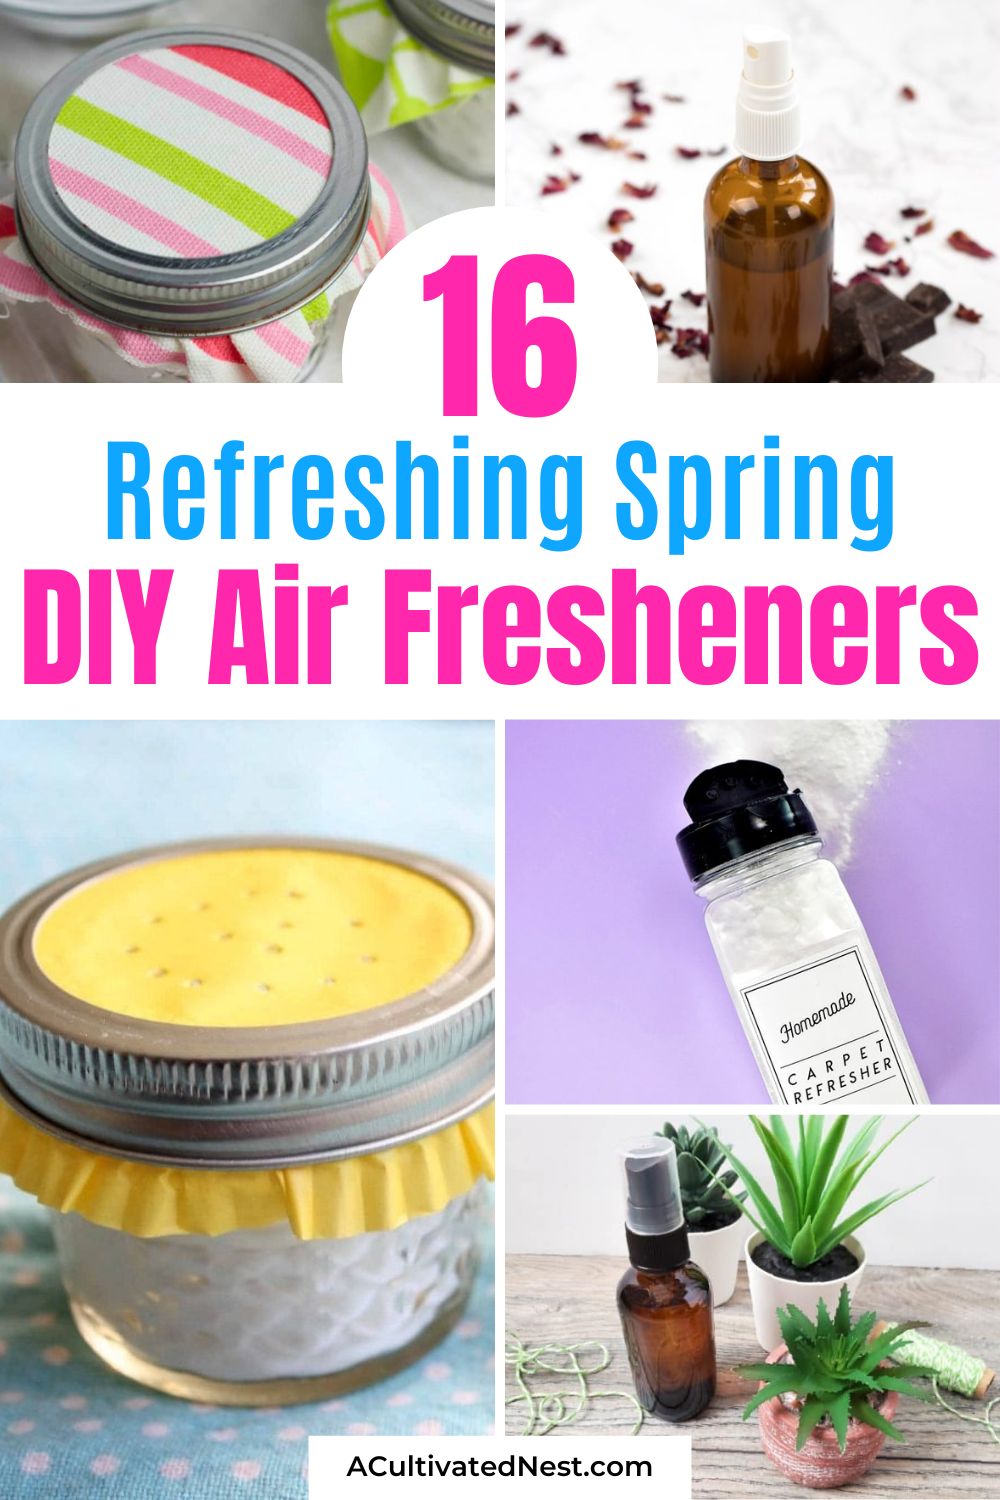 16 Refreshing Spring DIY Air Fresheners- Freshen up your home with these easy-to-make DIY air fresheners! From citrus blends to floral fragrances, discover how to infuse every corner of your space with the essence of spring. | #DIY #airFreshener #DIYAirFreshener #SpringRefresh #ACultivatedNest